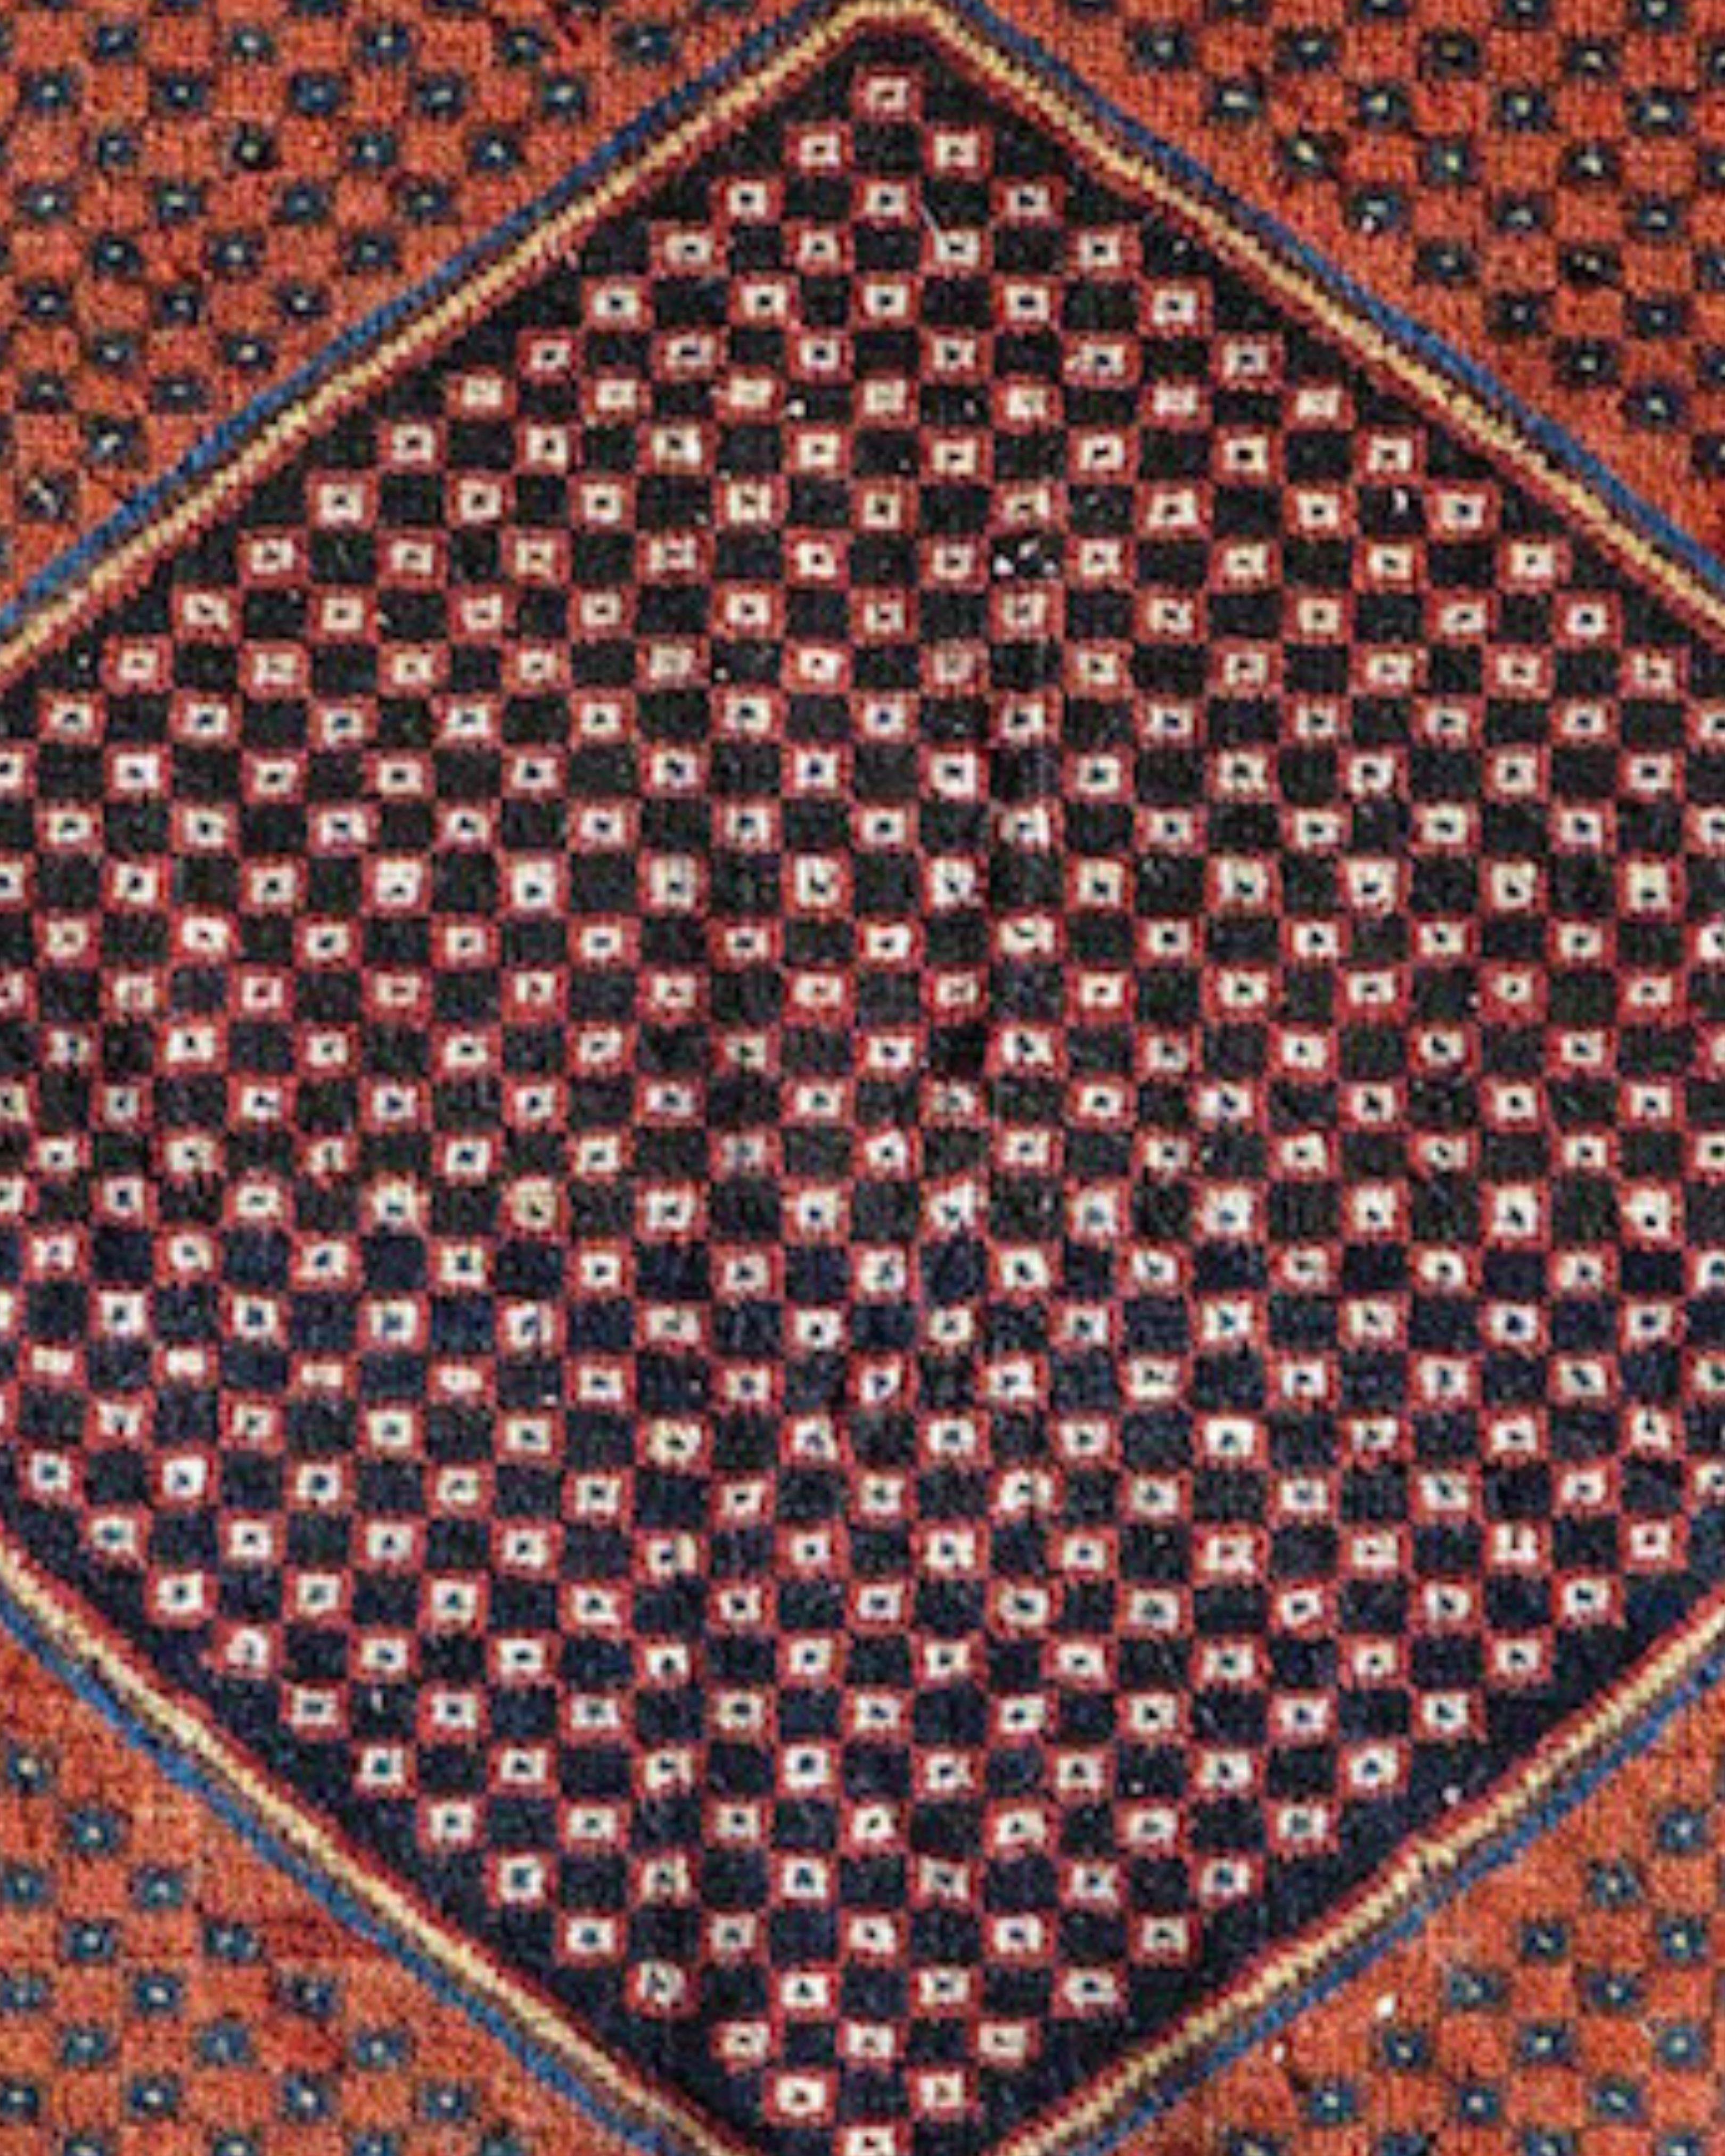 Antique Persian Afshar Bagface Bag, c. 1900

This highly graphic Afshar bag face draws a large central indigo-blue hexagon against a complimentary contrasting terra cotta field. Both are punctuated throughout by a checker-board network, giving the